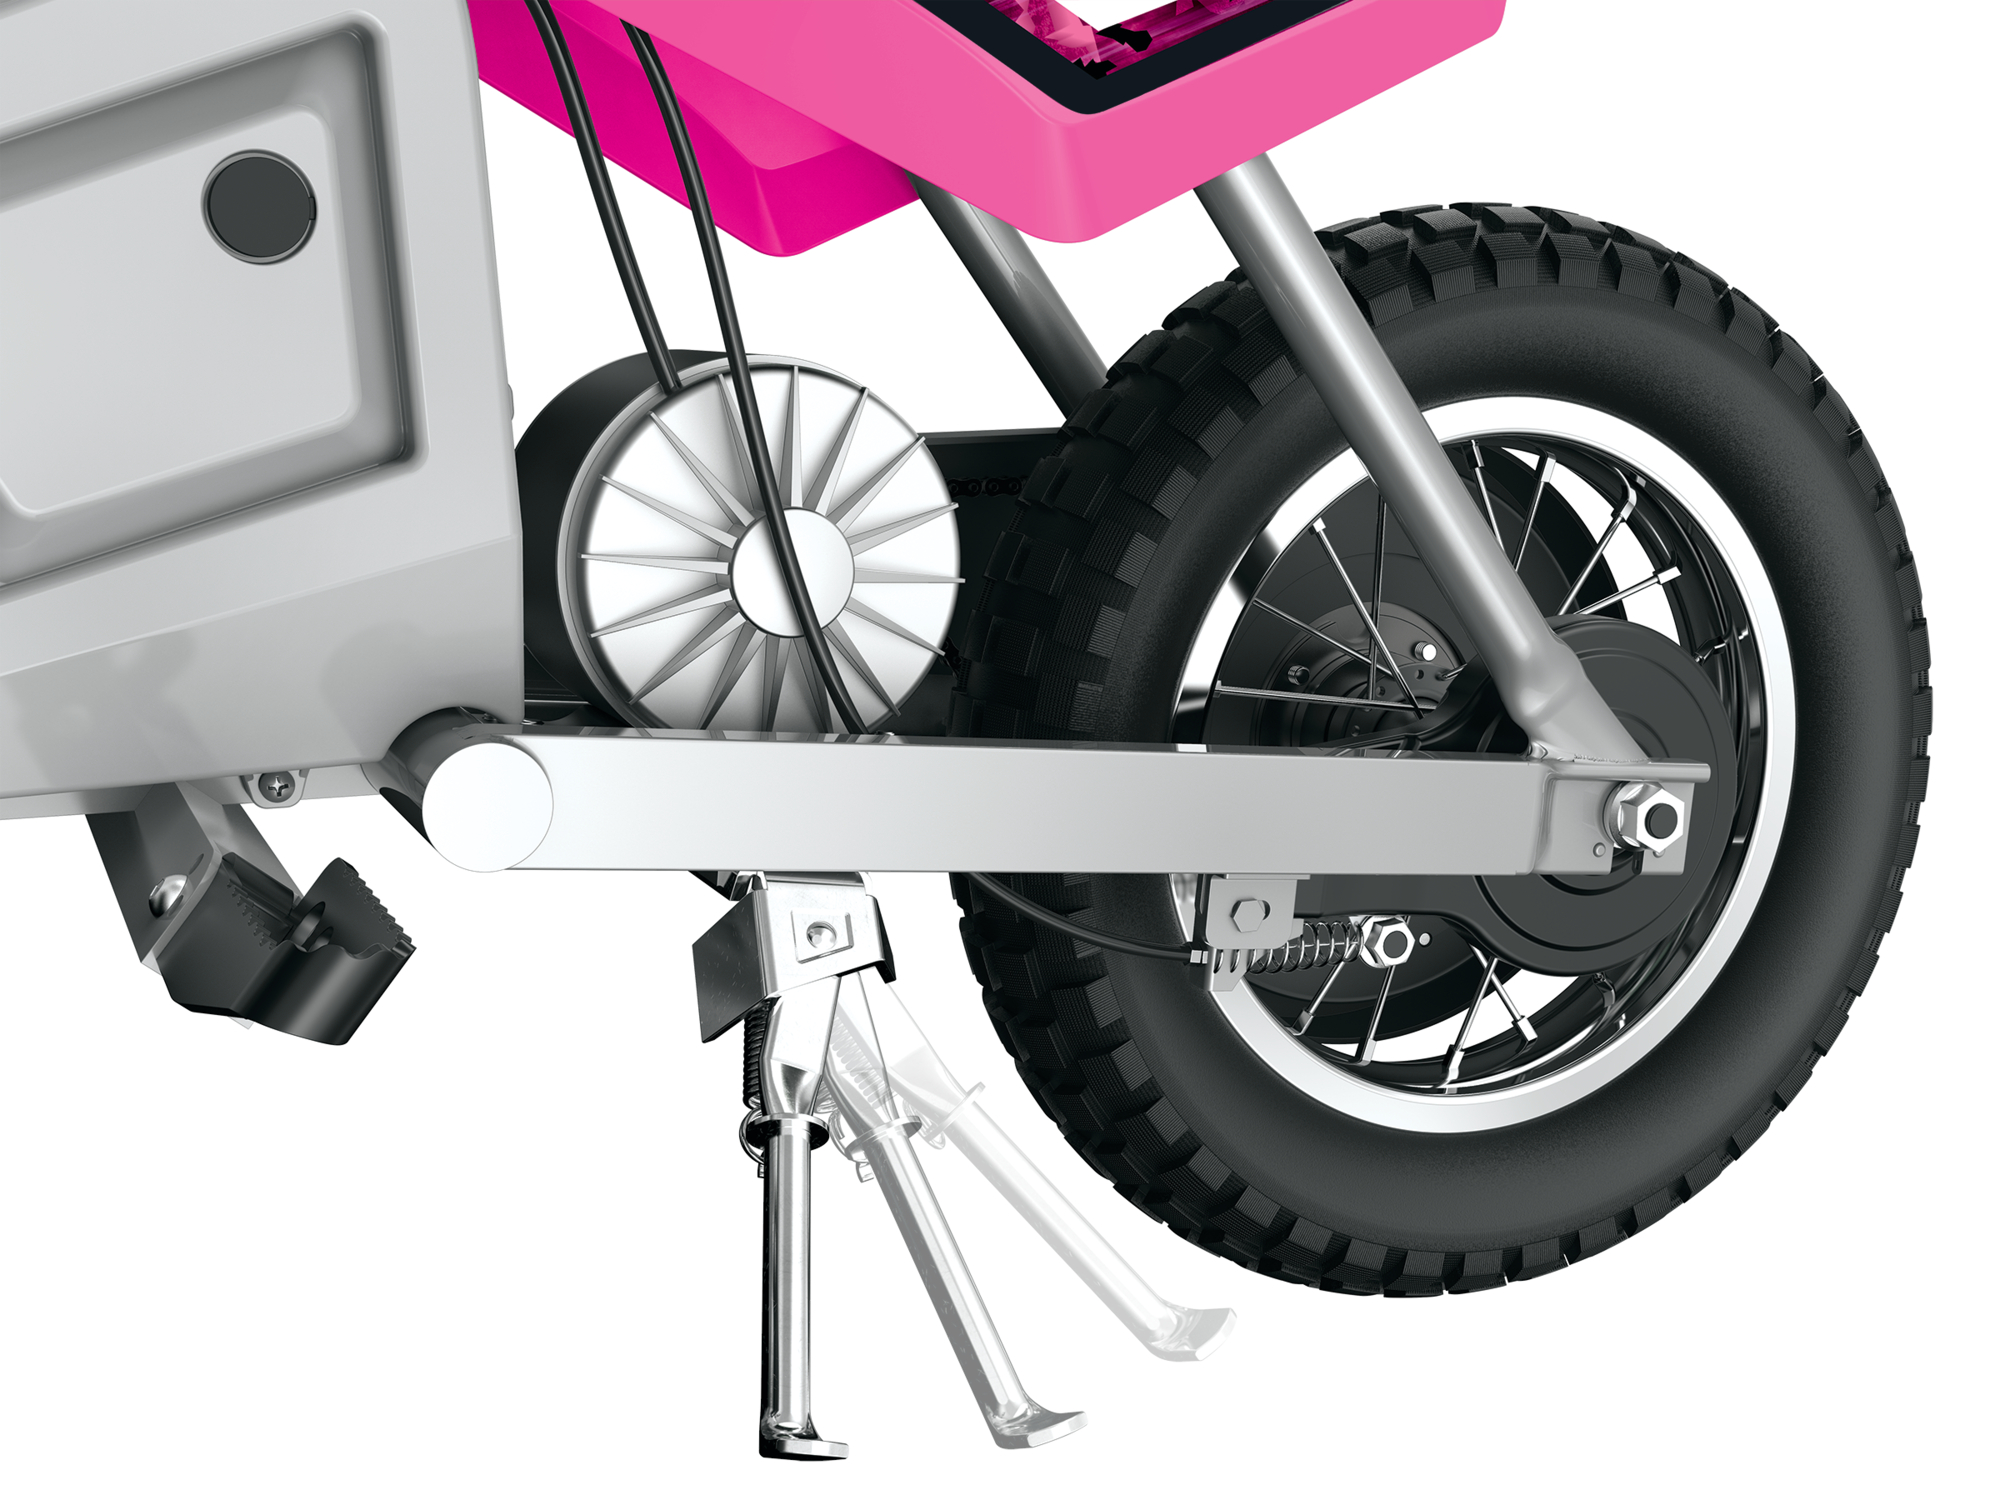 Razor Dirt Rocket MX350 - Pink, up to 14 mph, 24V Electric-Powered Dirt Bike for Kids 13+ - image 7 of 10